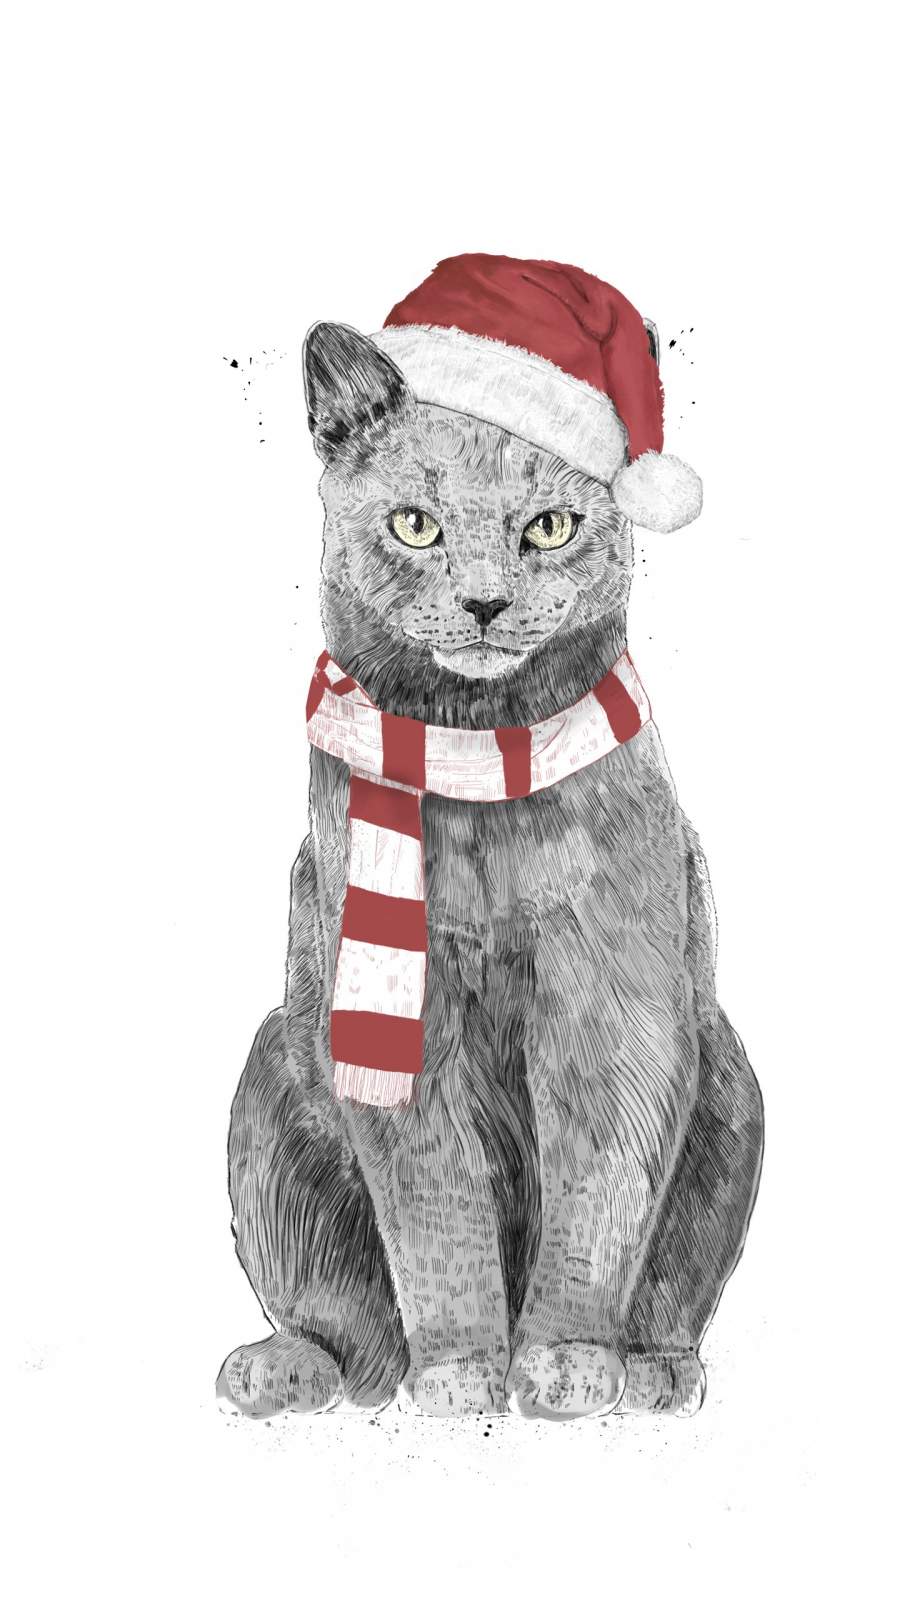 Christmas Cat Wallpapers